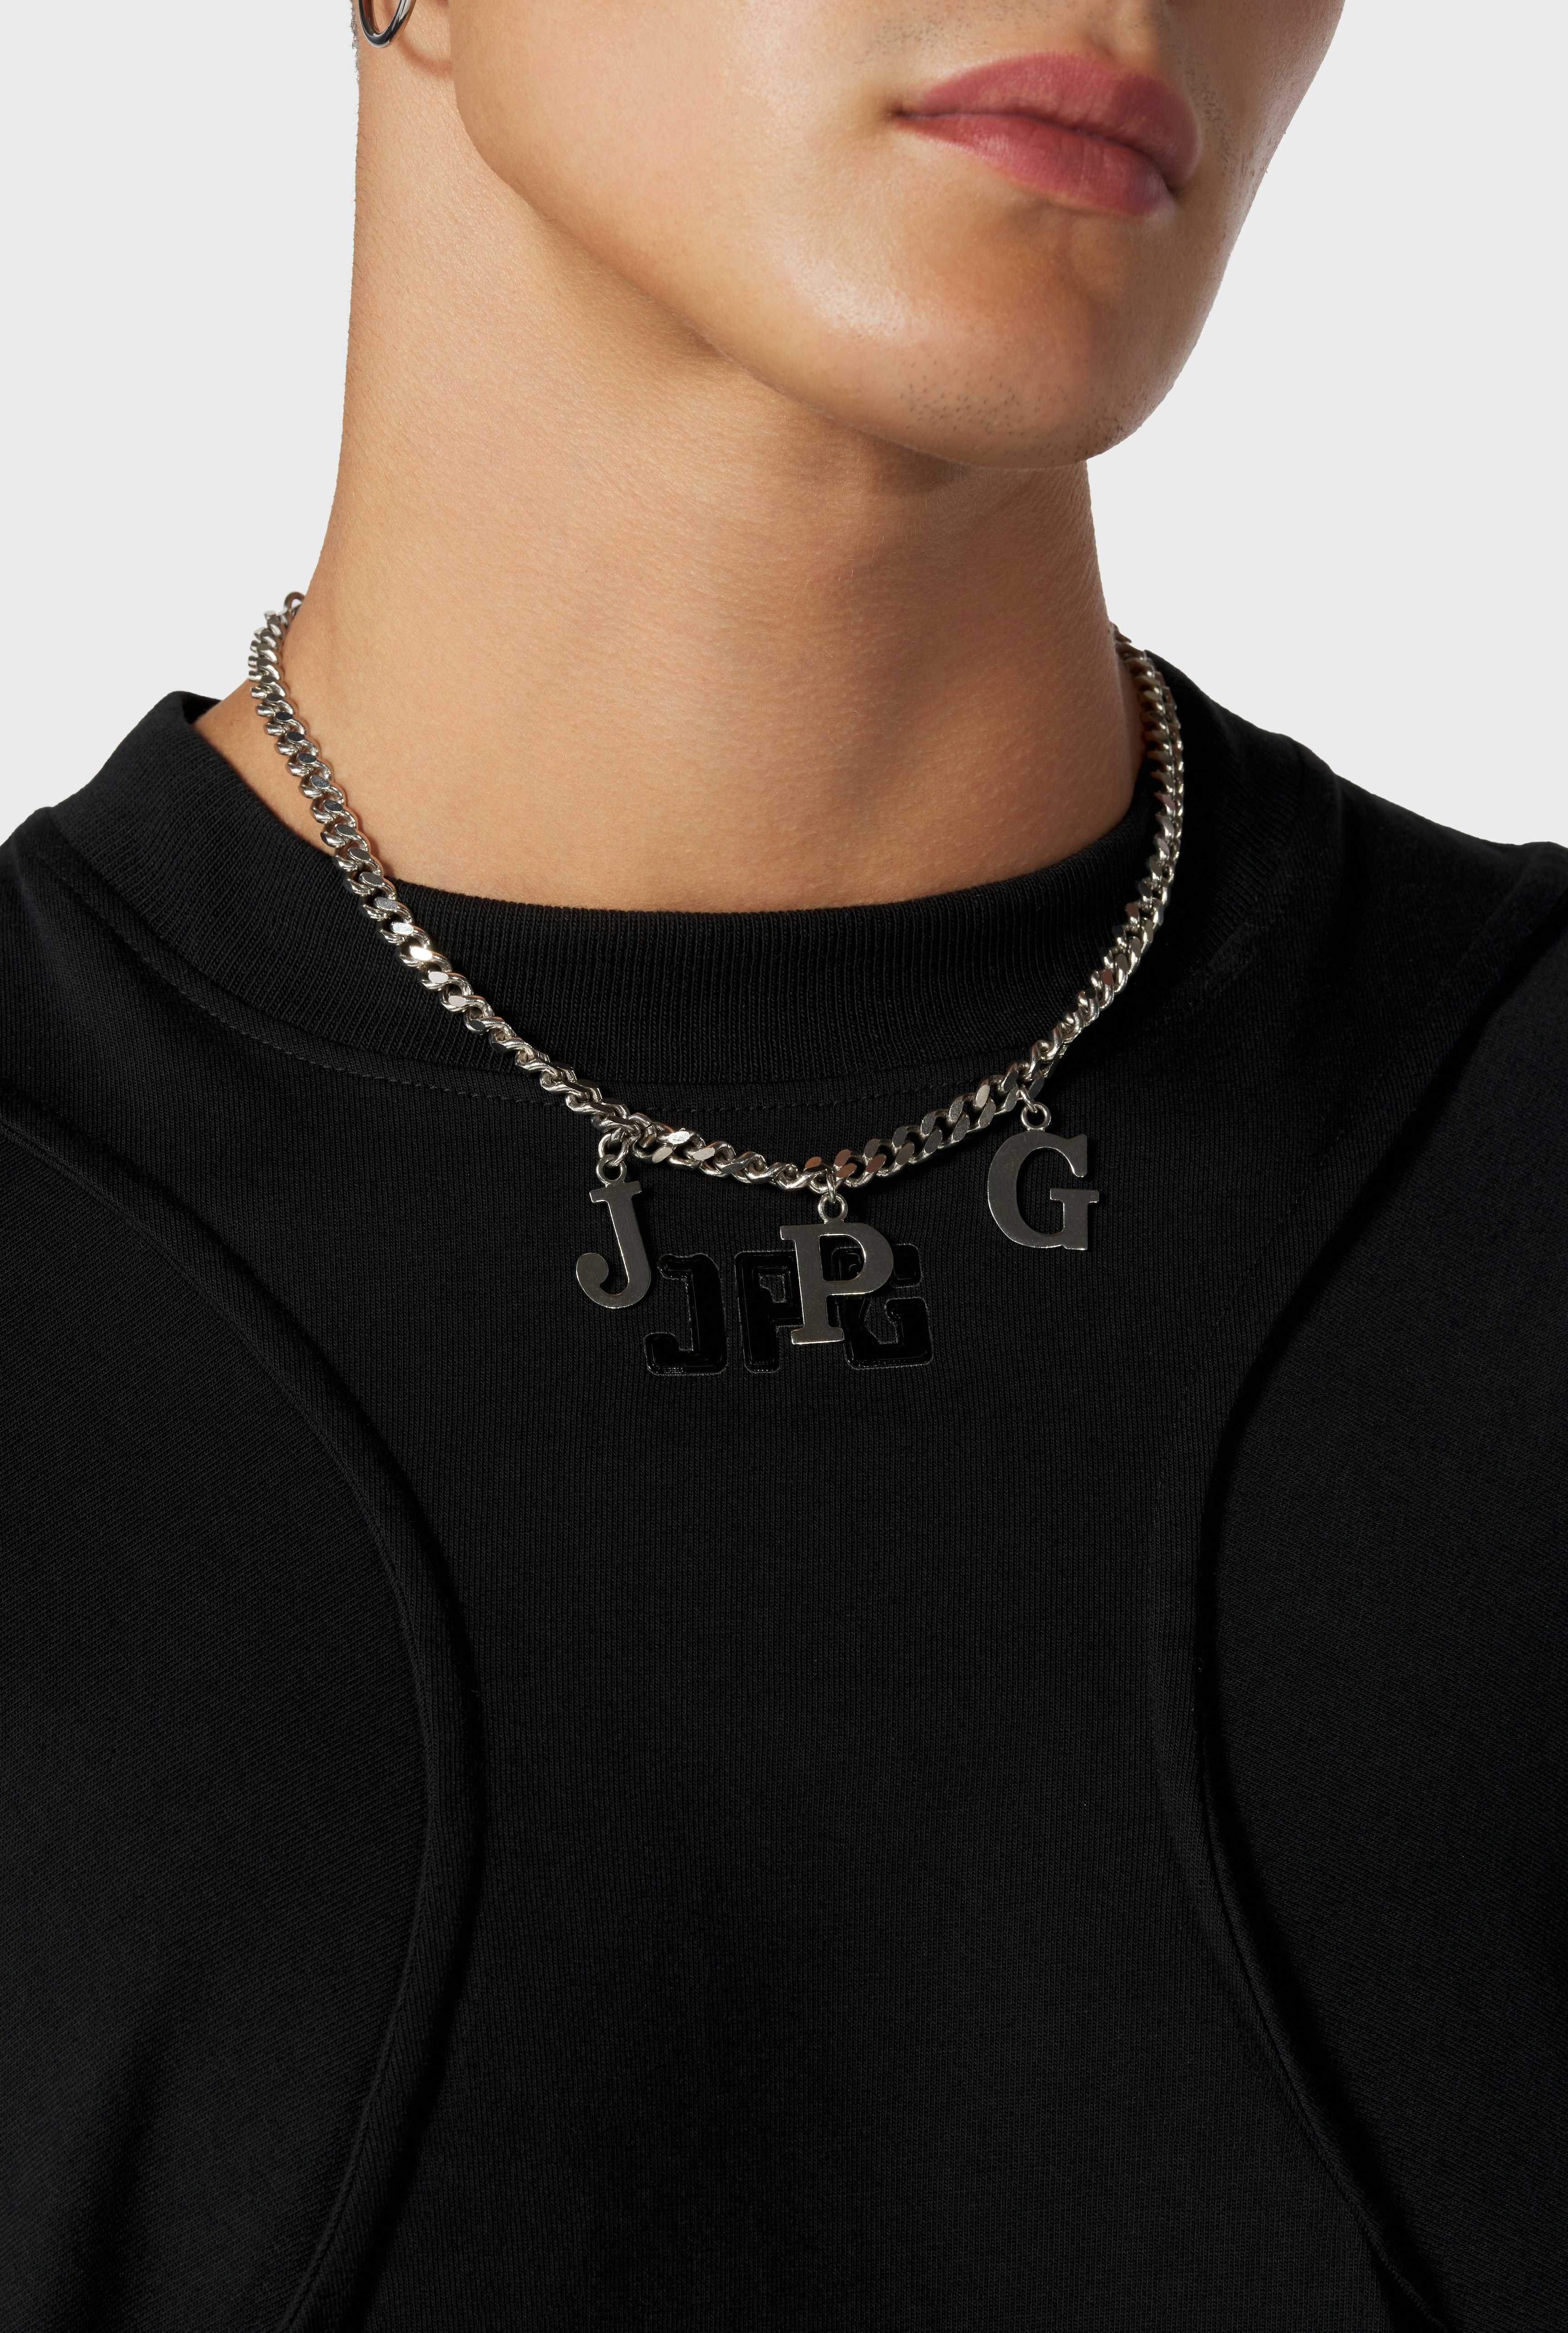 Le collier JPG hover